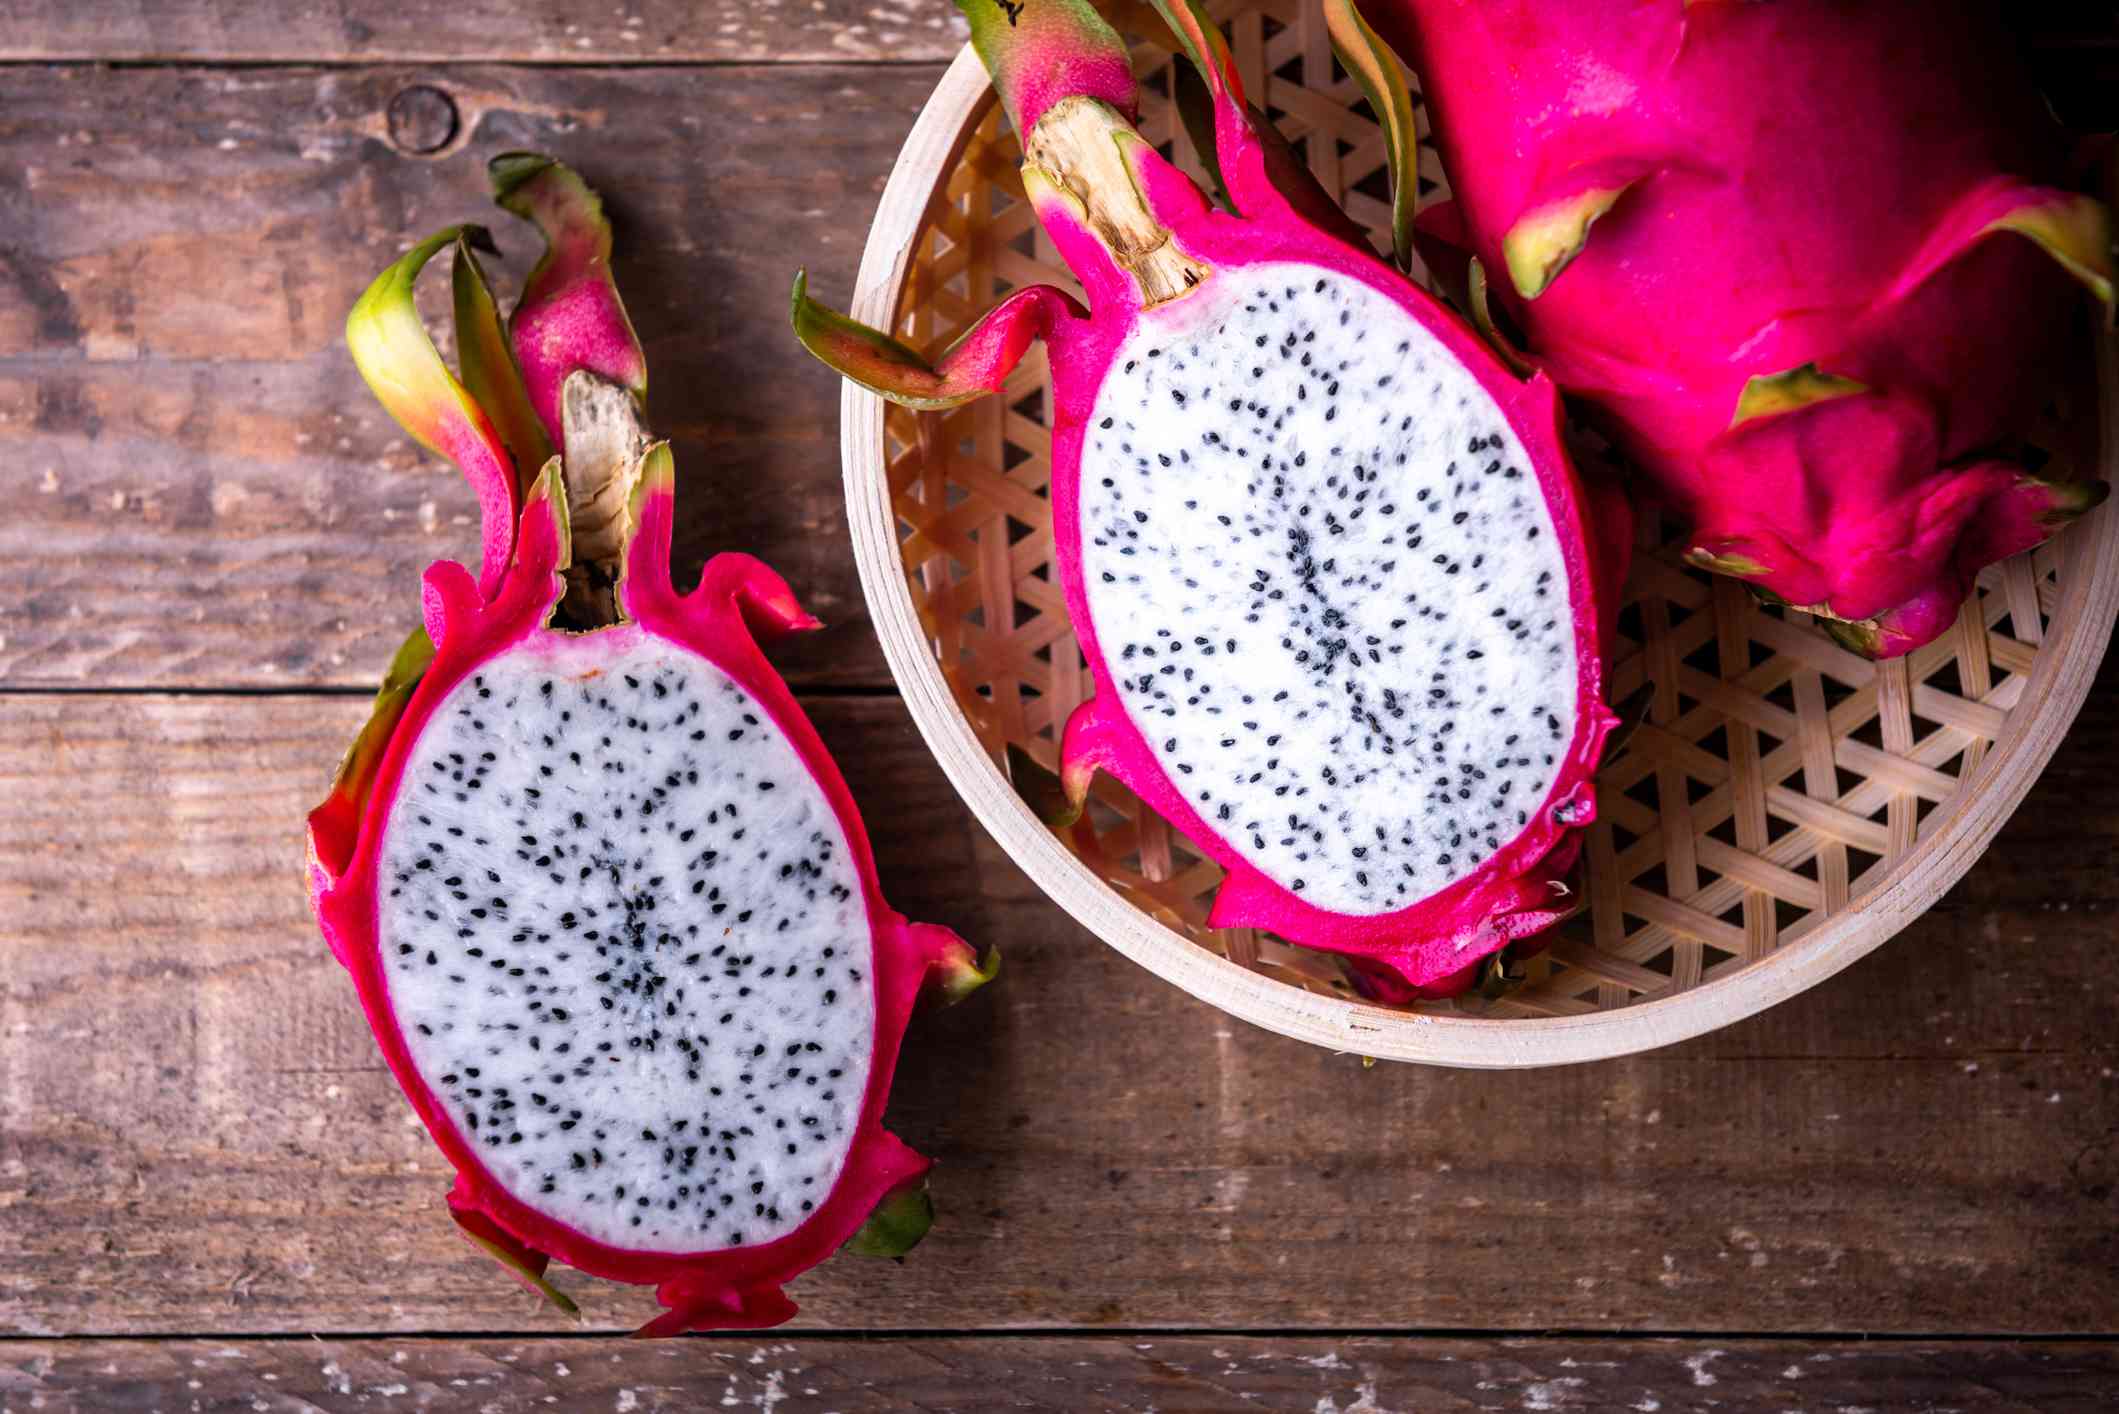 17-facts-about-dragonfruit